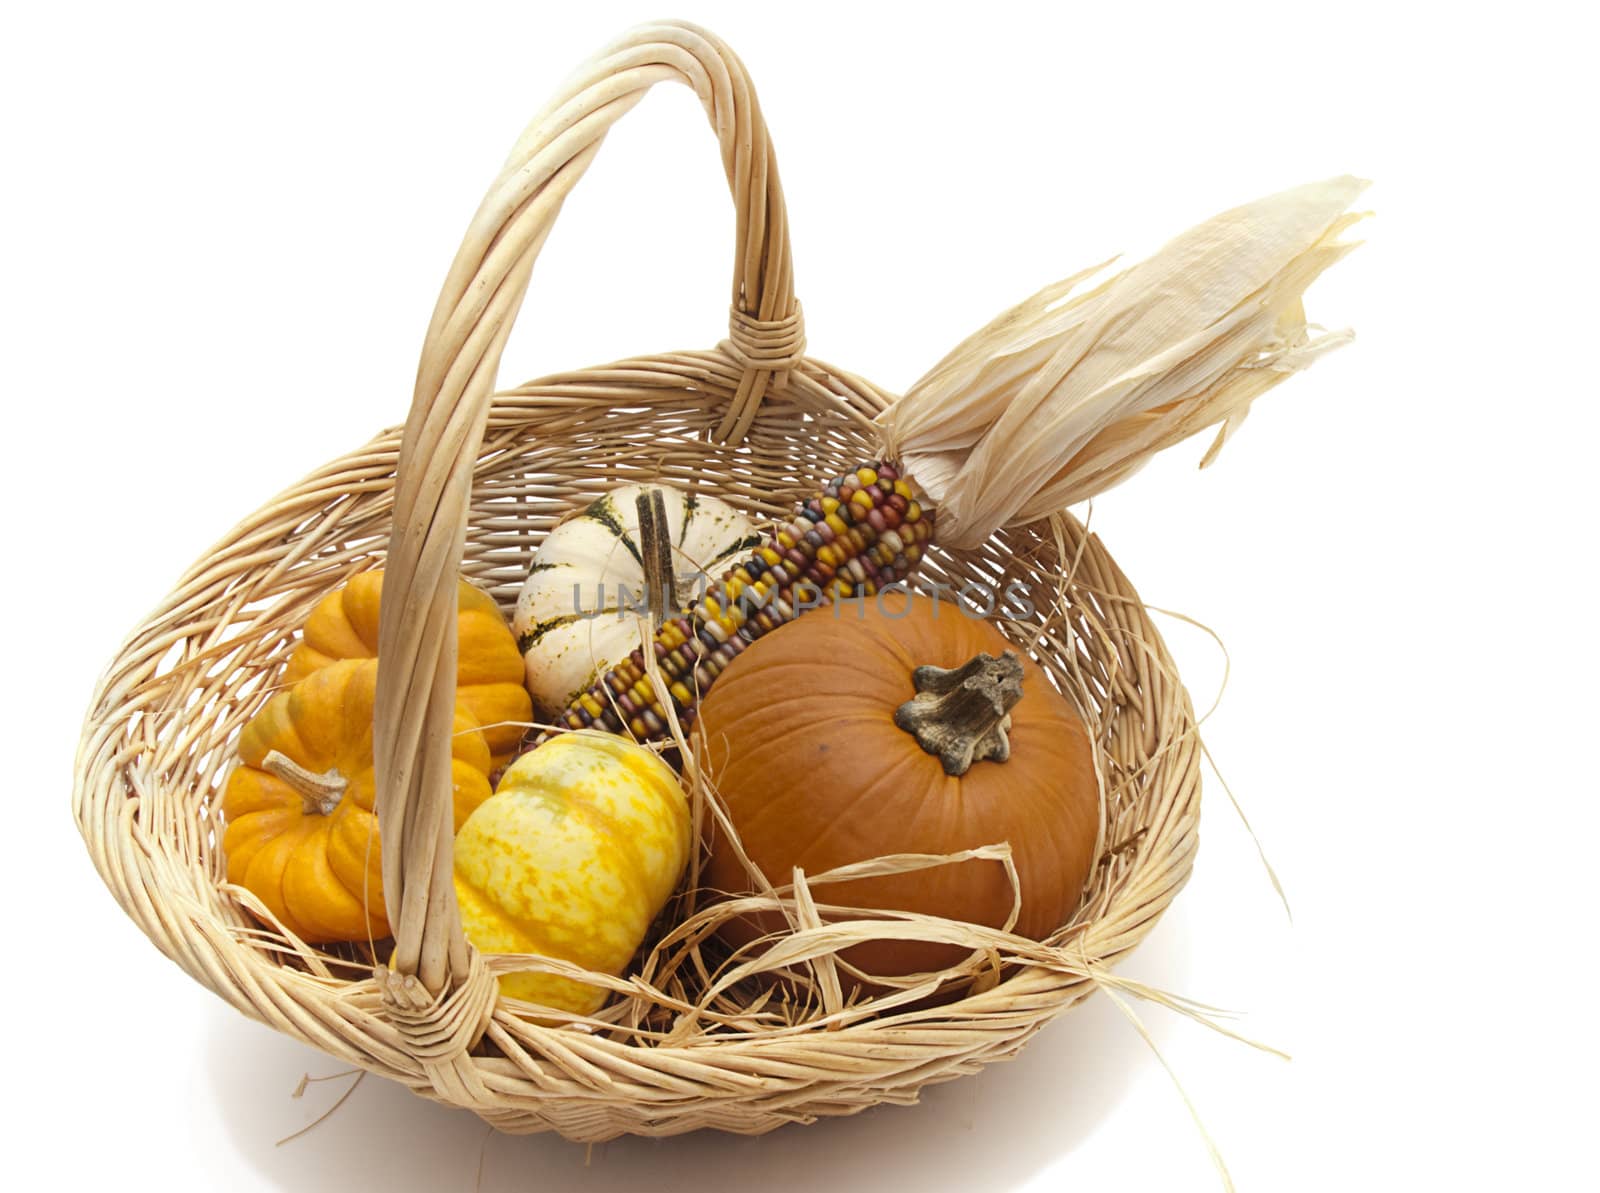 Decorative white, yellow, and orange pumpkins and Indian corn in a large basket on white background. Useful for Thanksgiving theme.